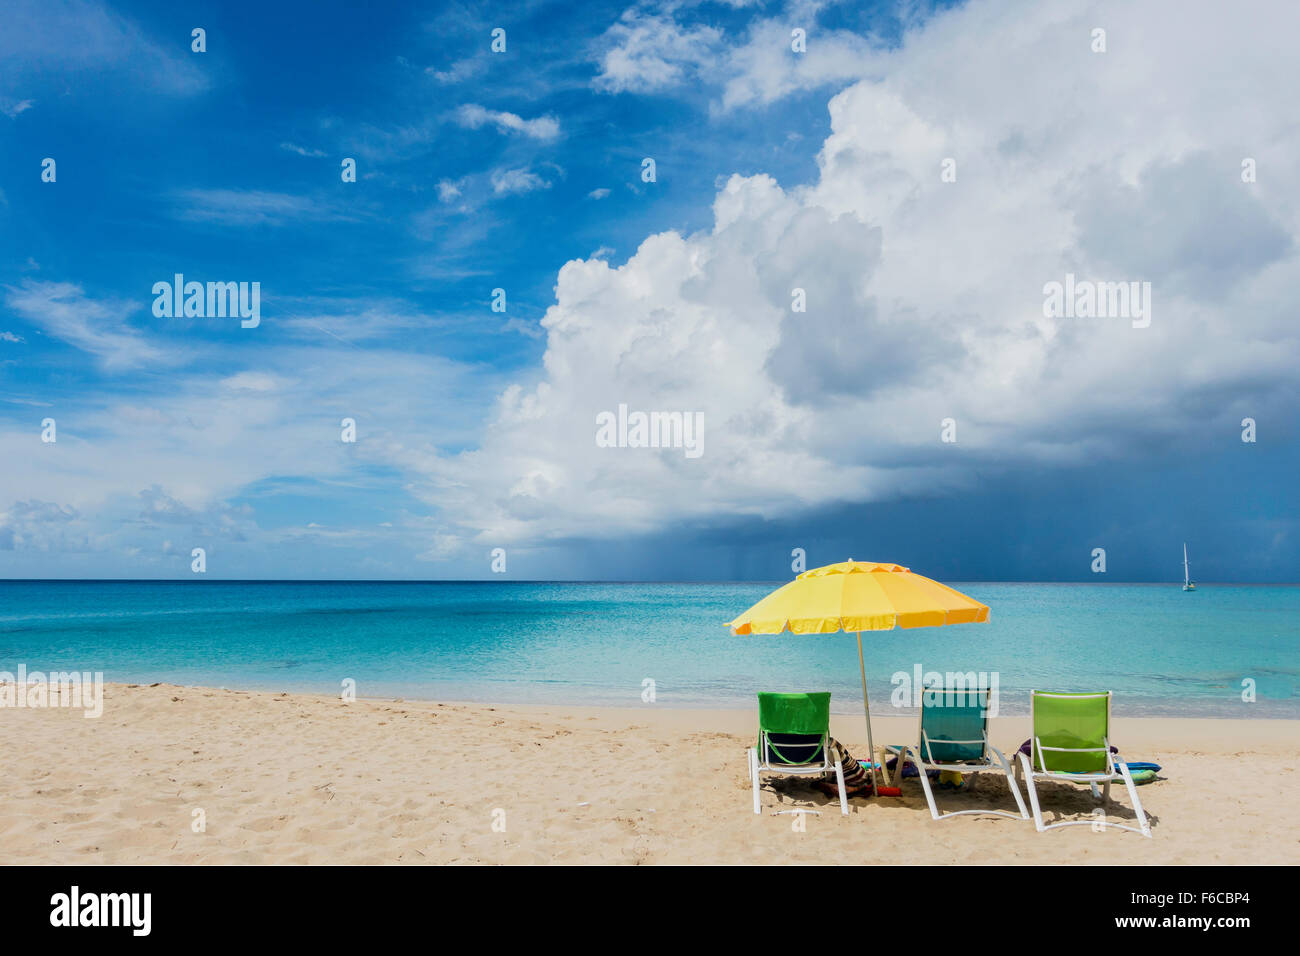 Three beach chairs under a yellow umbrella look out on a tropical storm over the Caribbean. St, Croix, U.S. Virgin Islands. Stock Photo